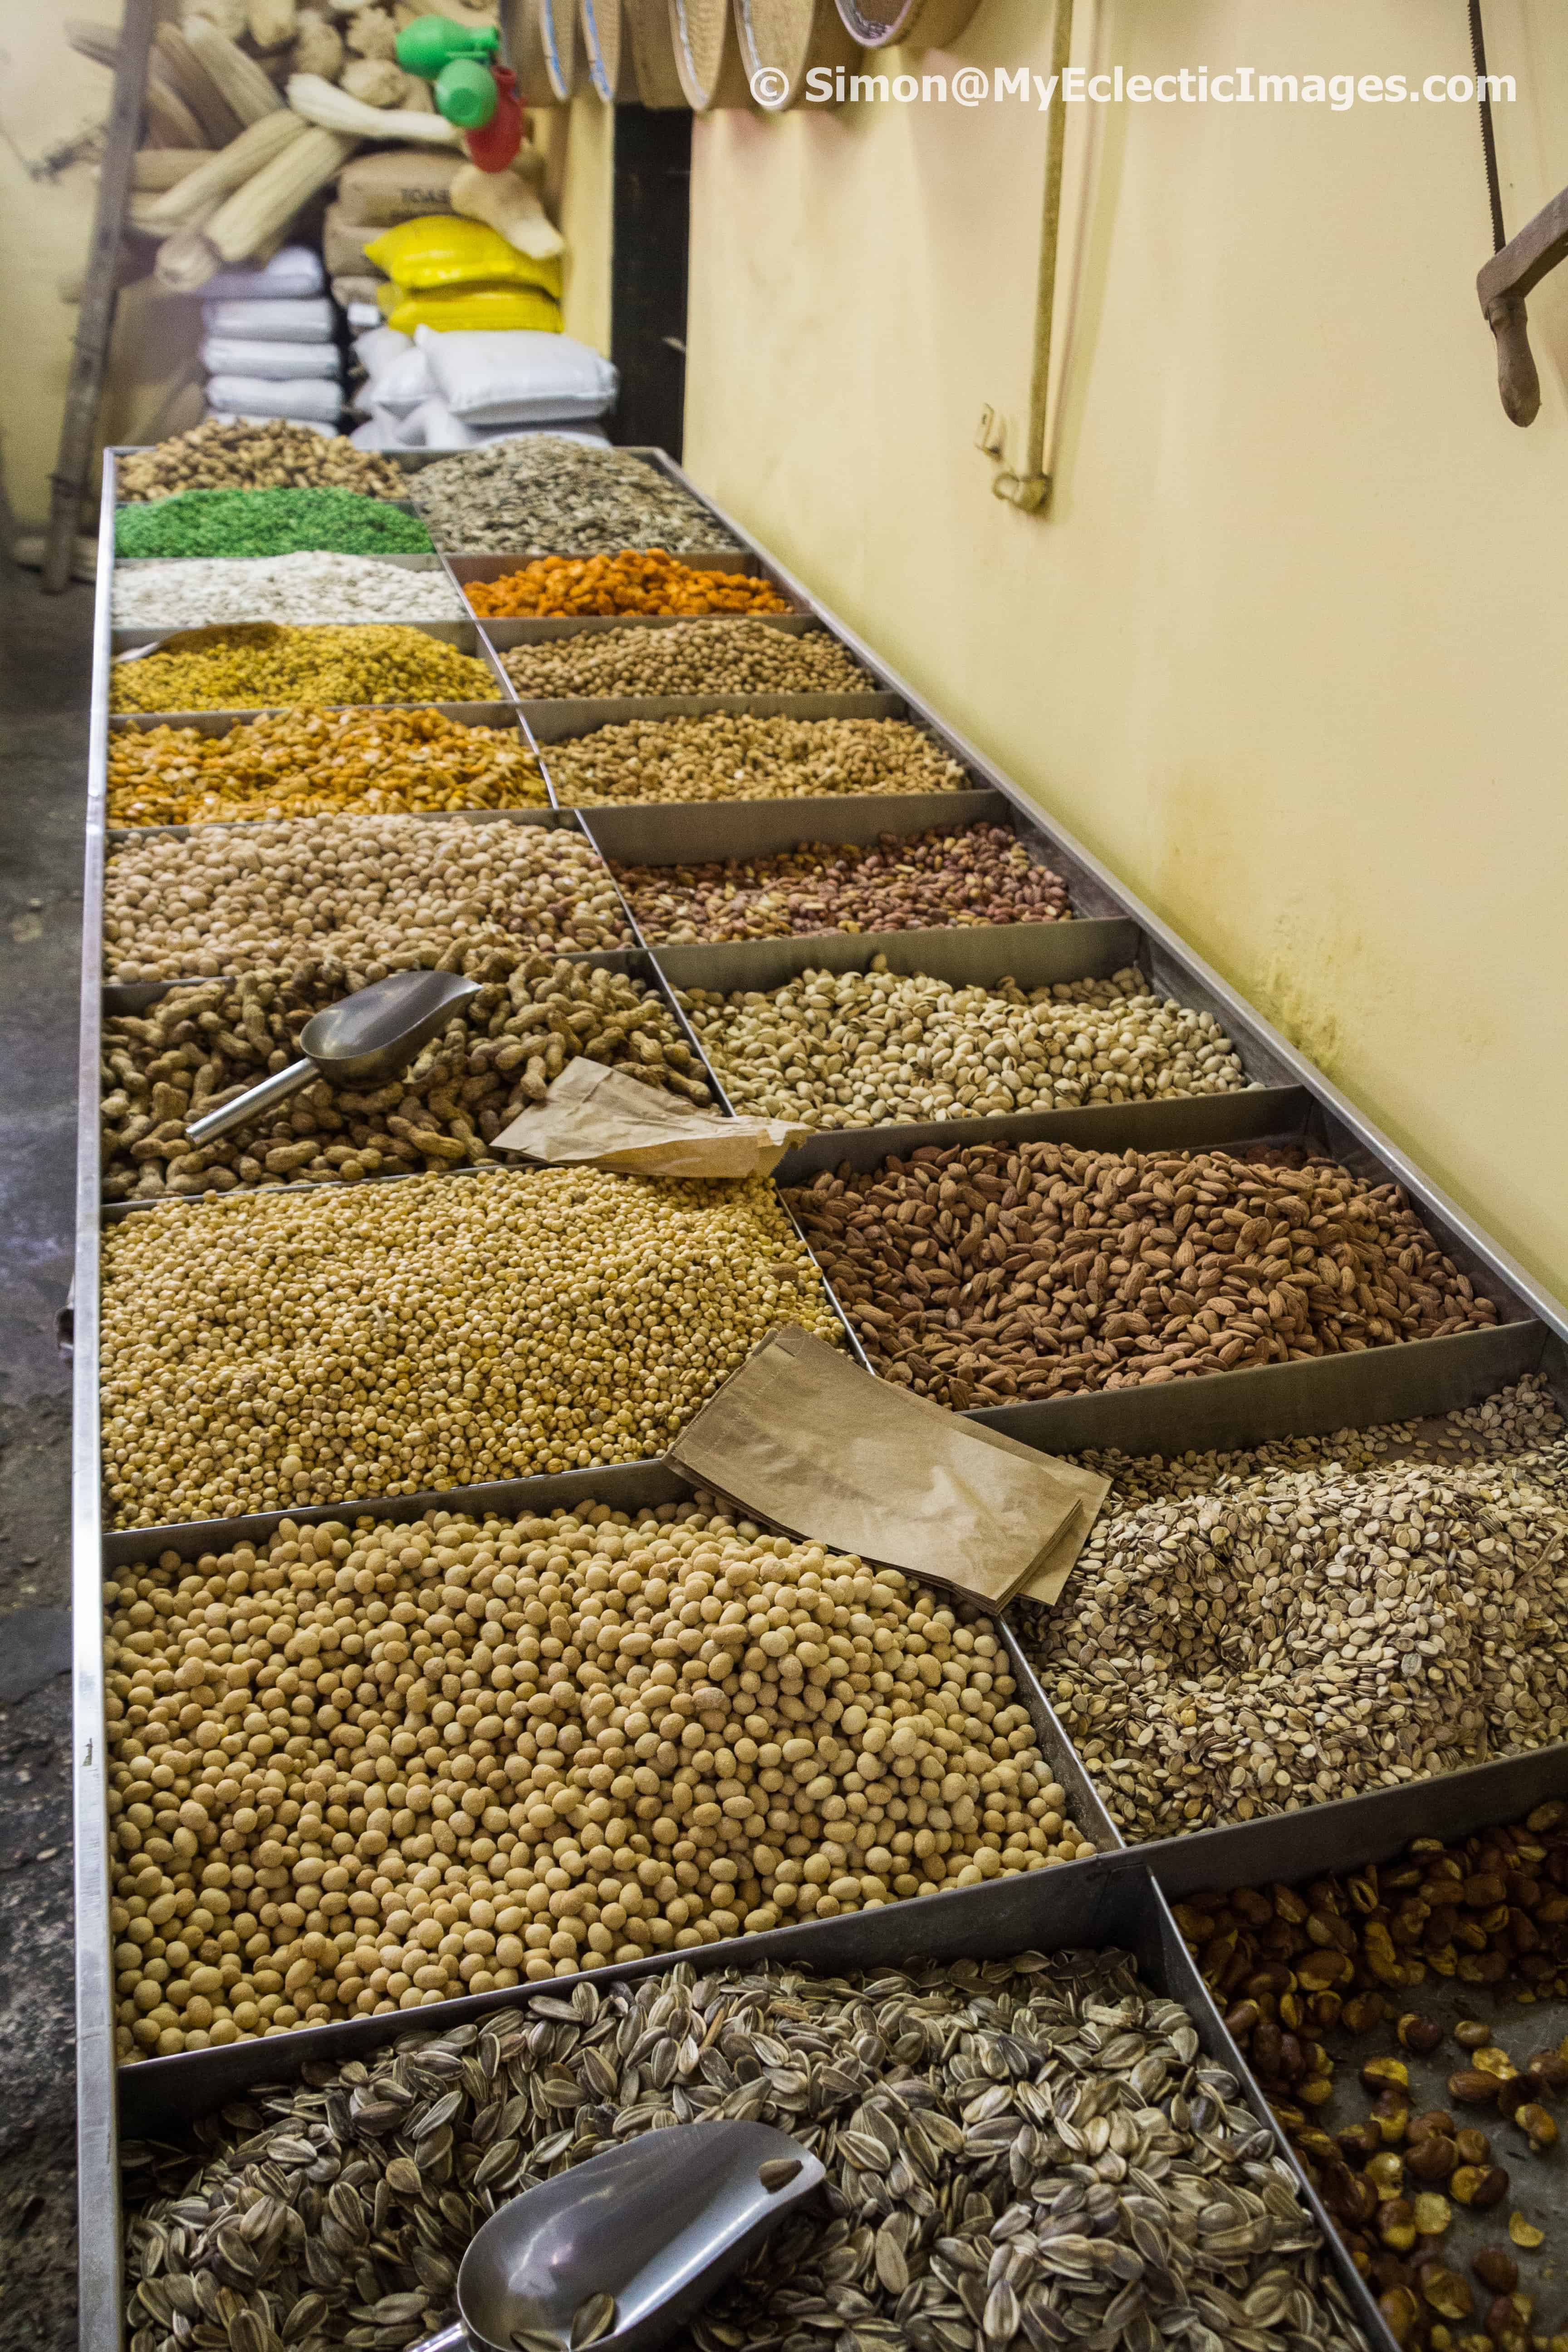 Dried Pulses, Beans and Nuts at the spice store in Nazareth